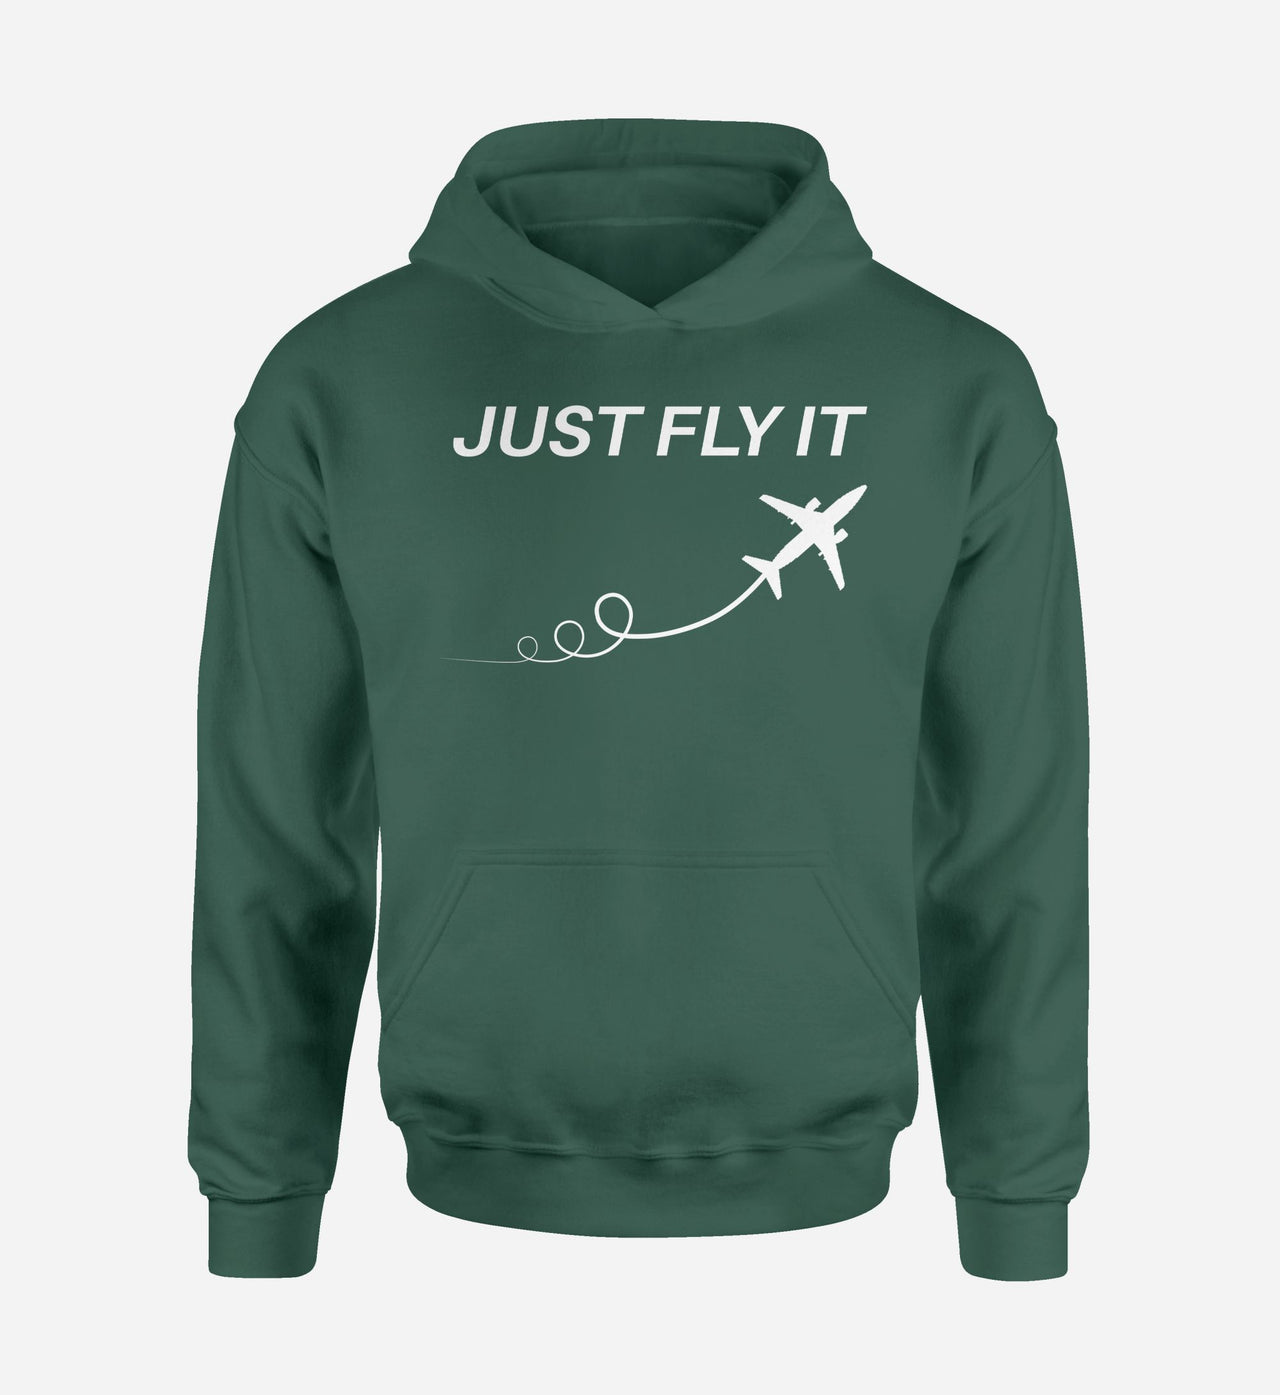 Just Fly It Designed Hoodies